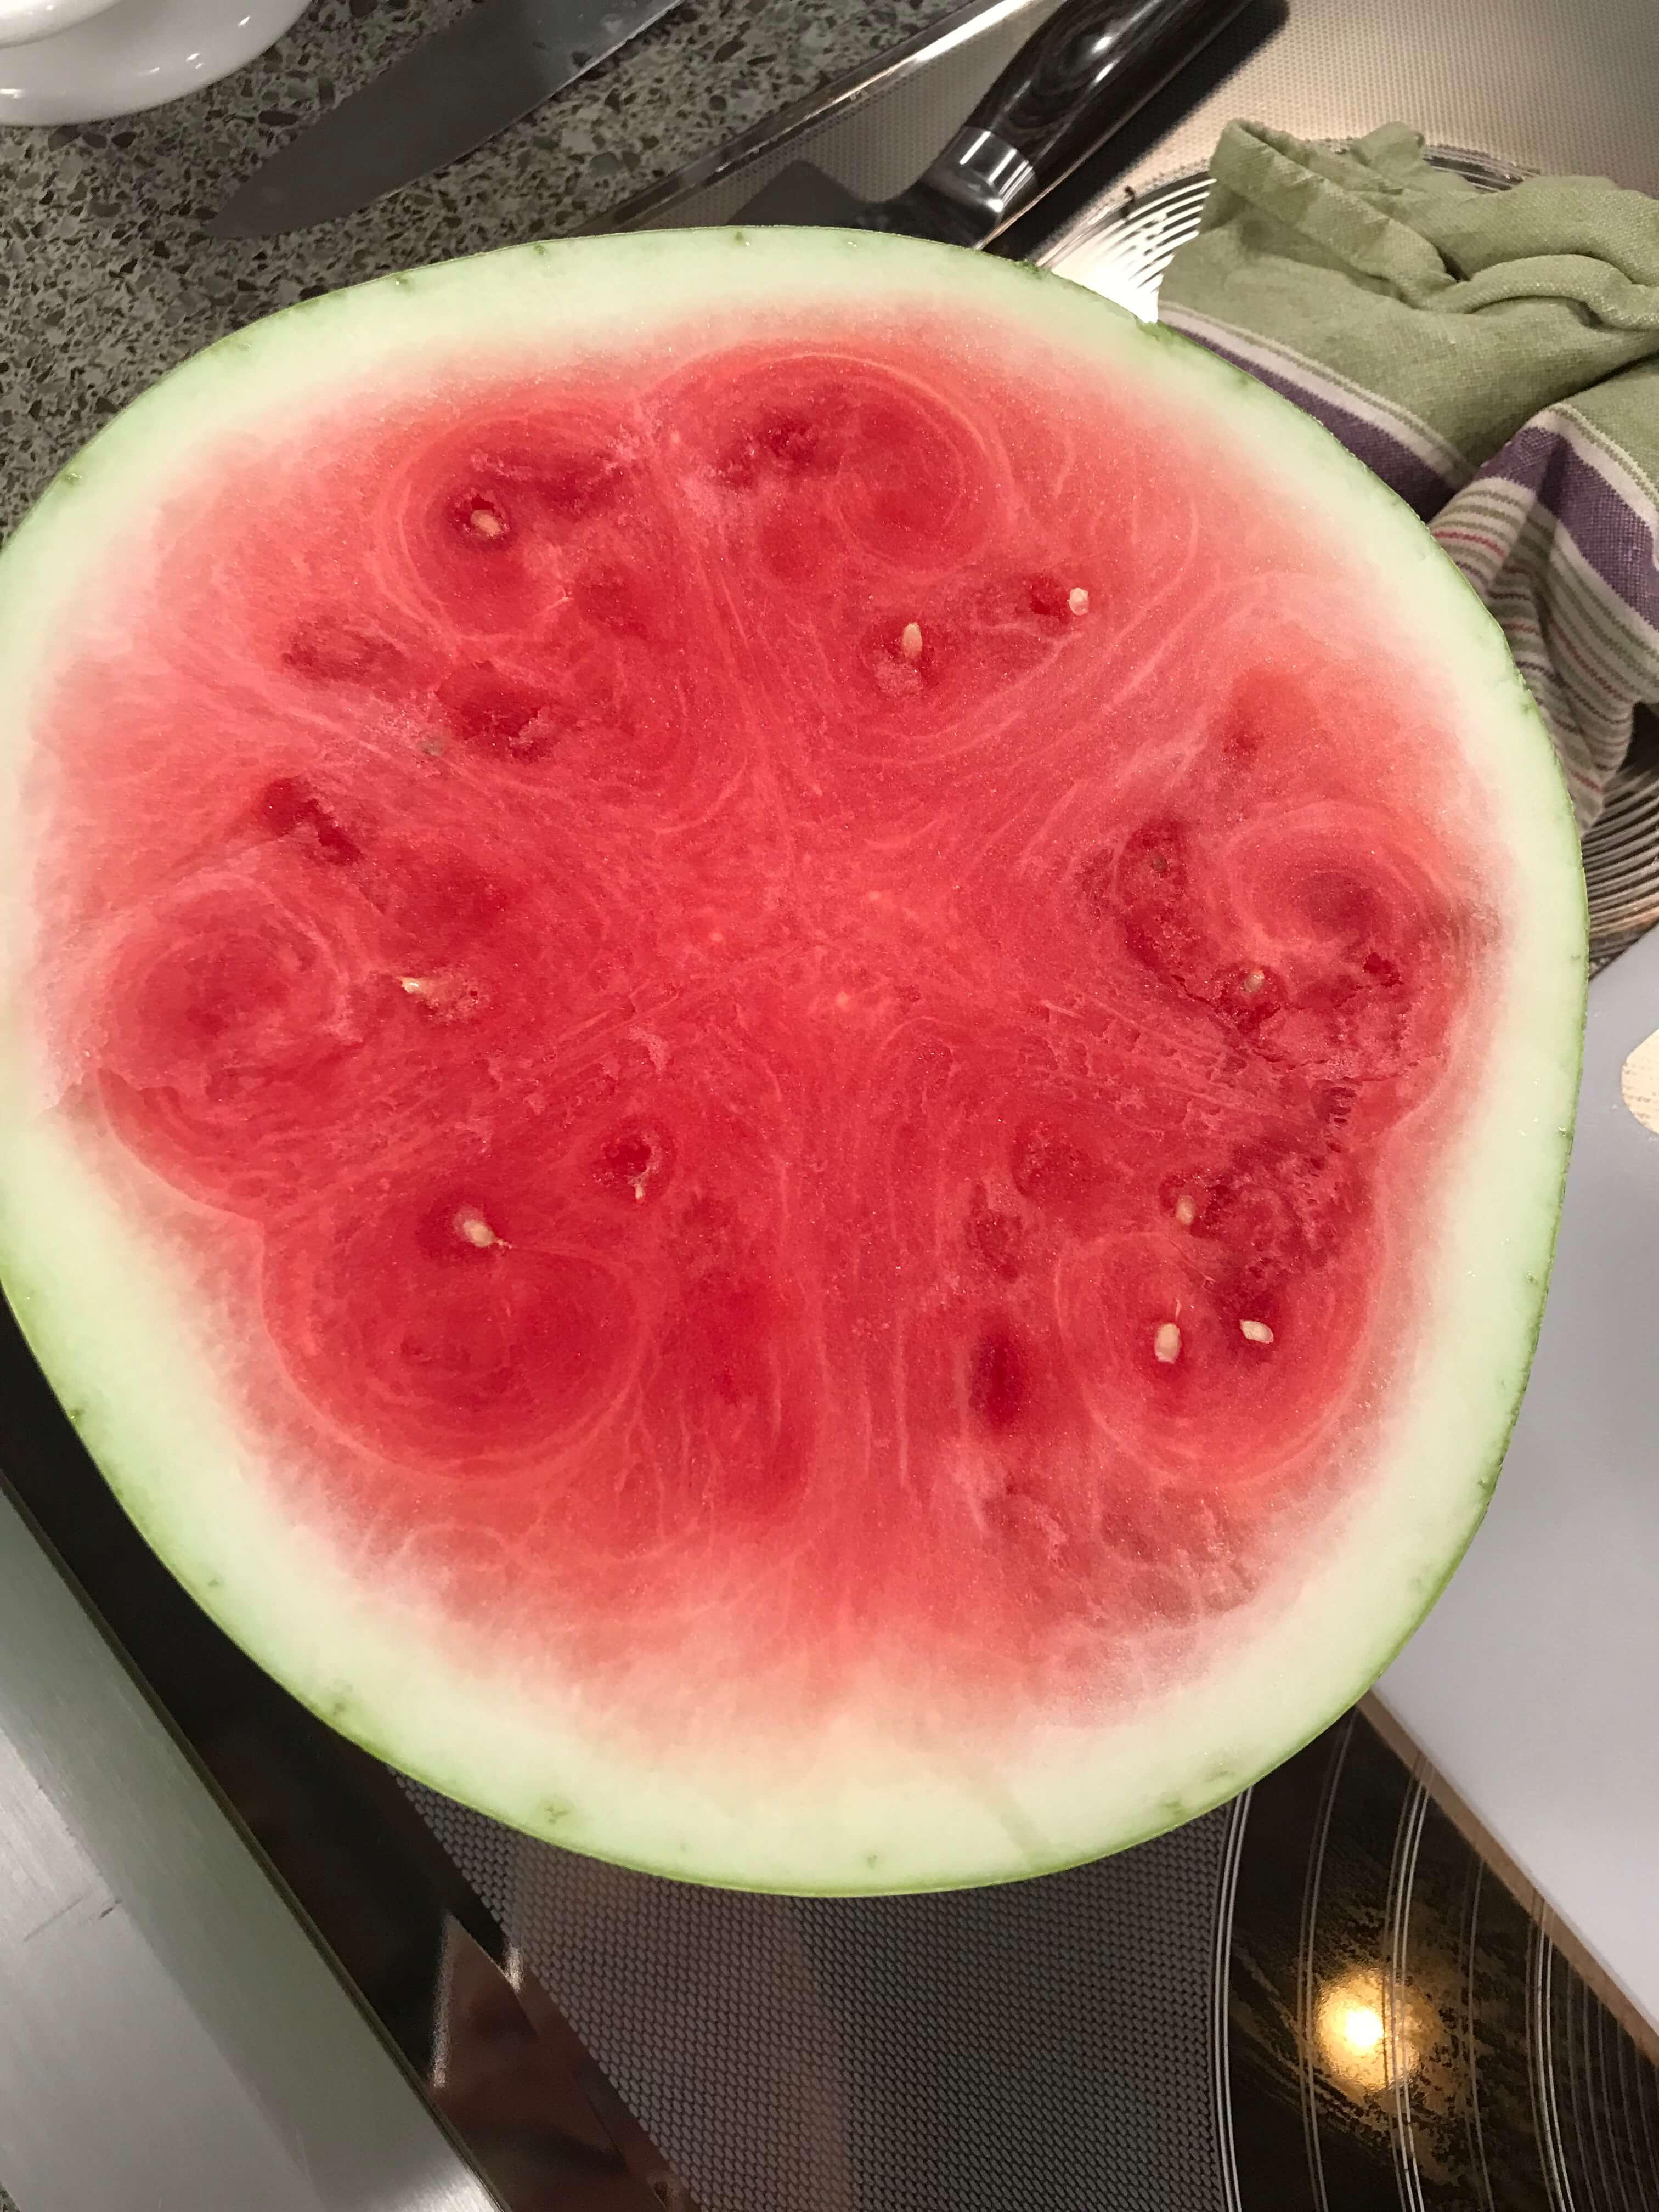 How to select a watermelon